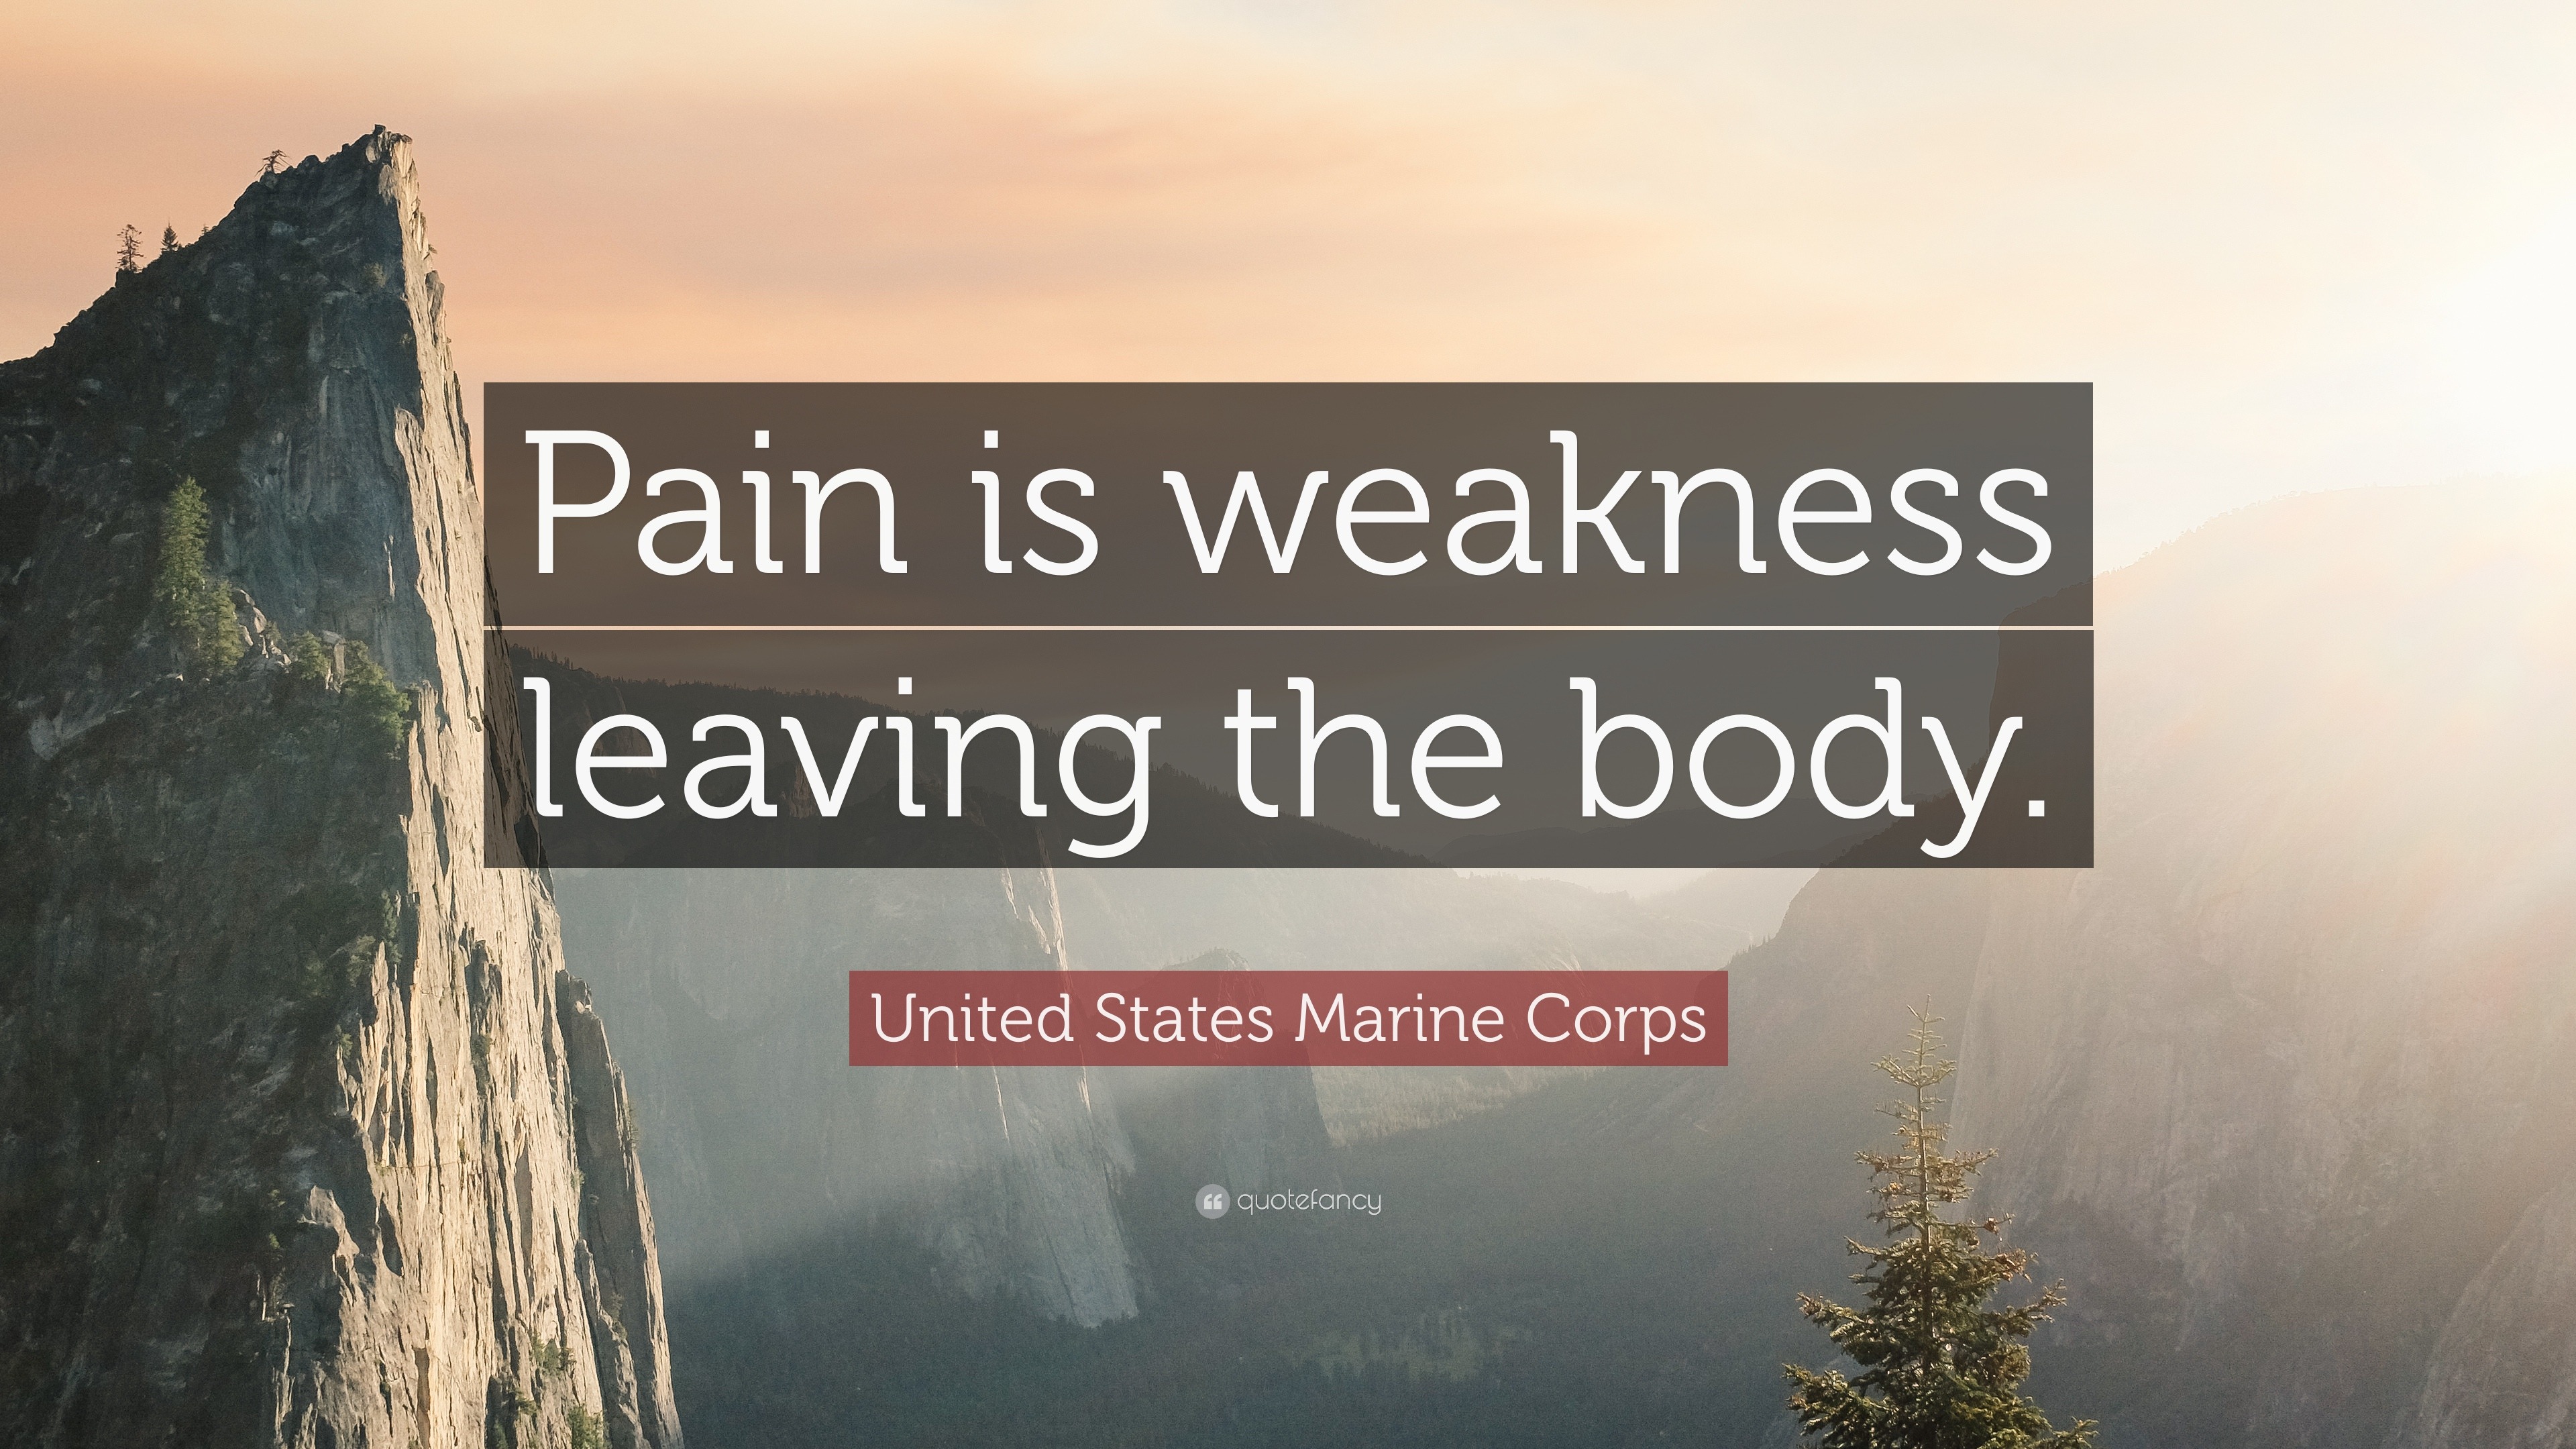 United States Marine Corps Quote: “Pain is weakness leaving the body